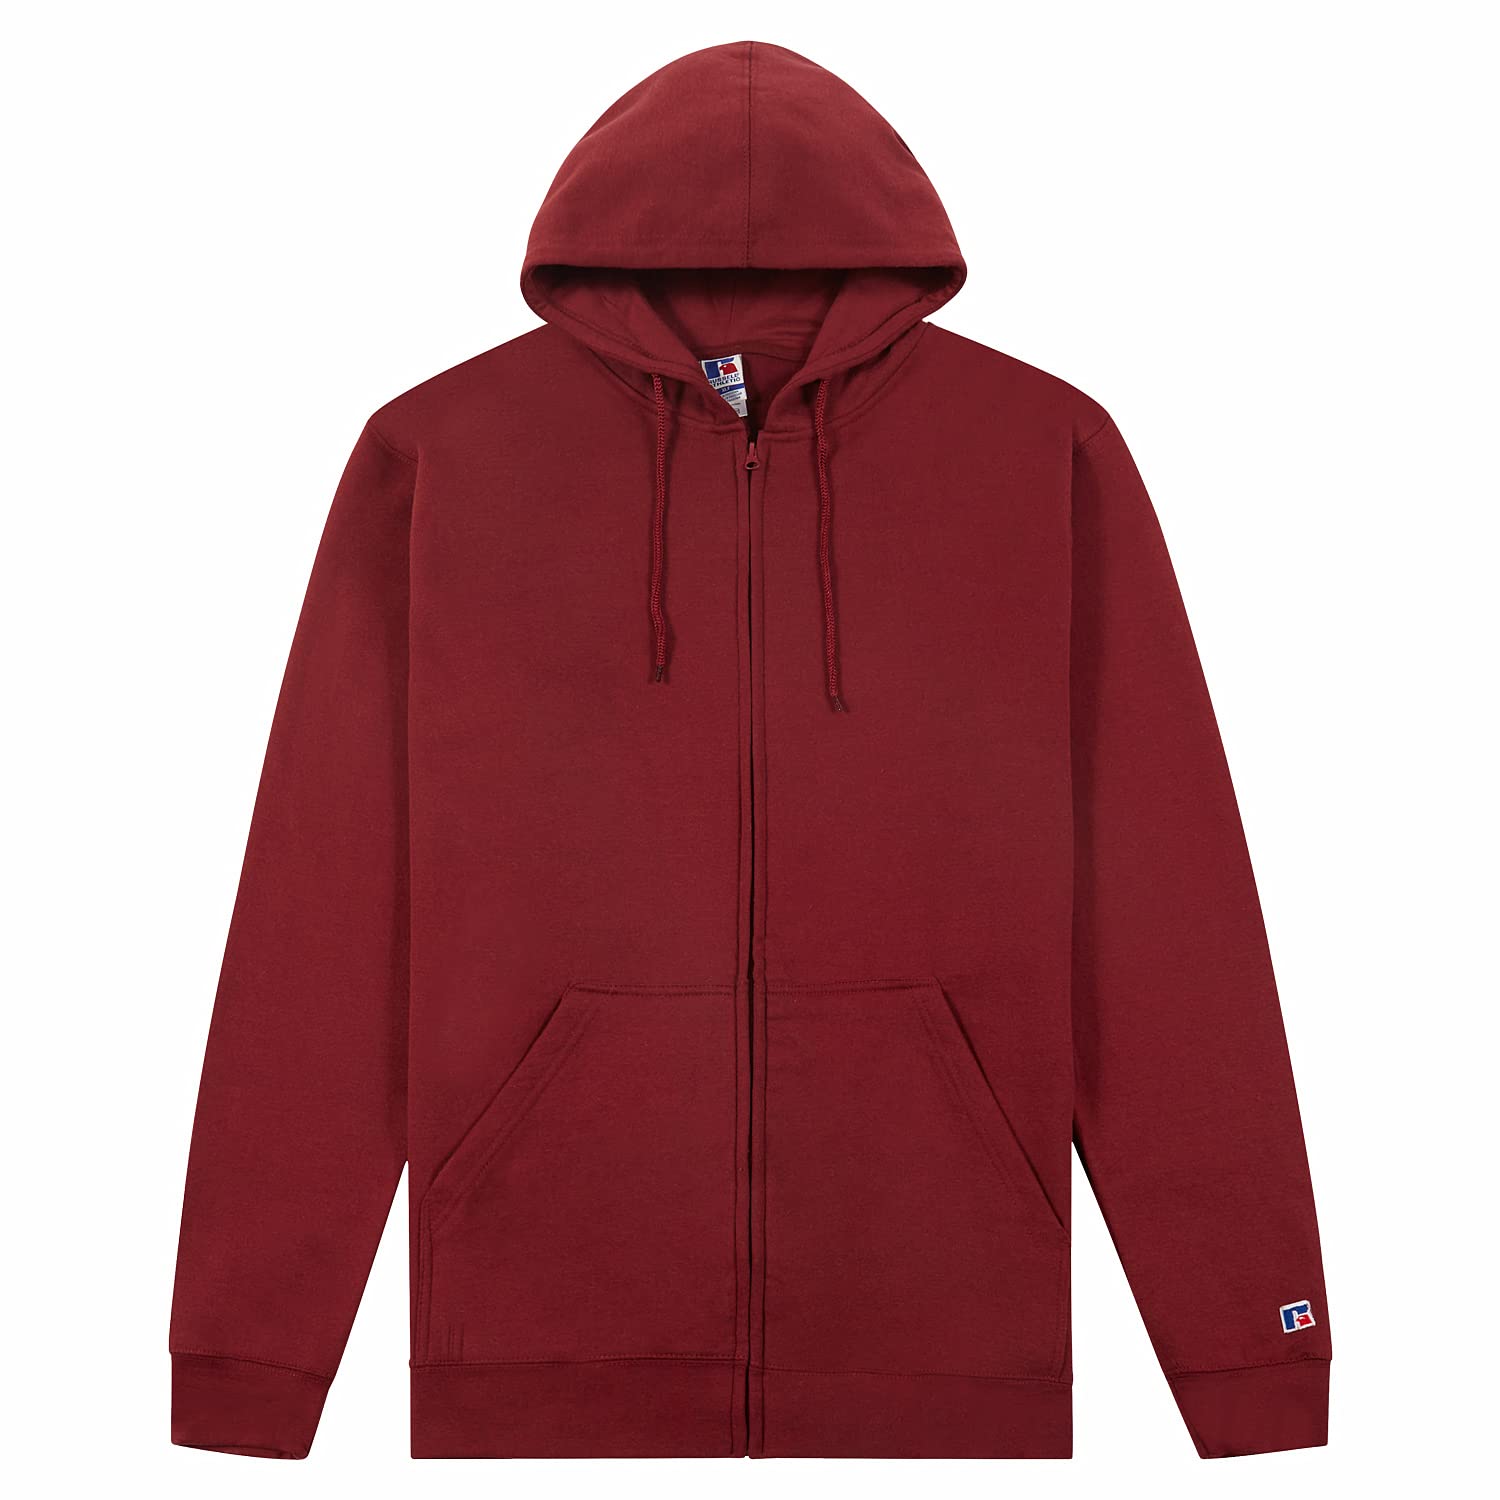 Russell Athletic Big & Tall Zip Up Hoodies for Men